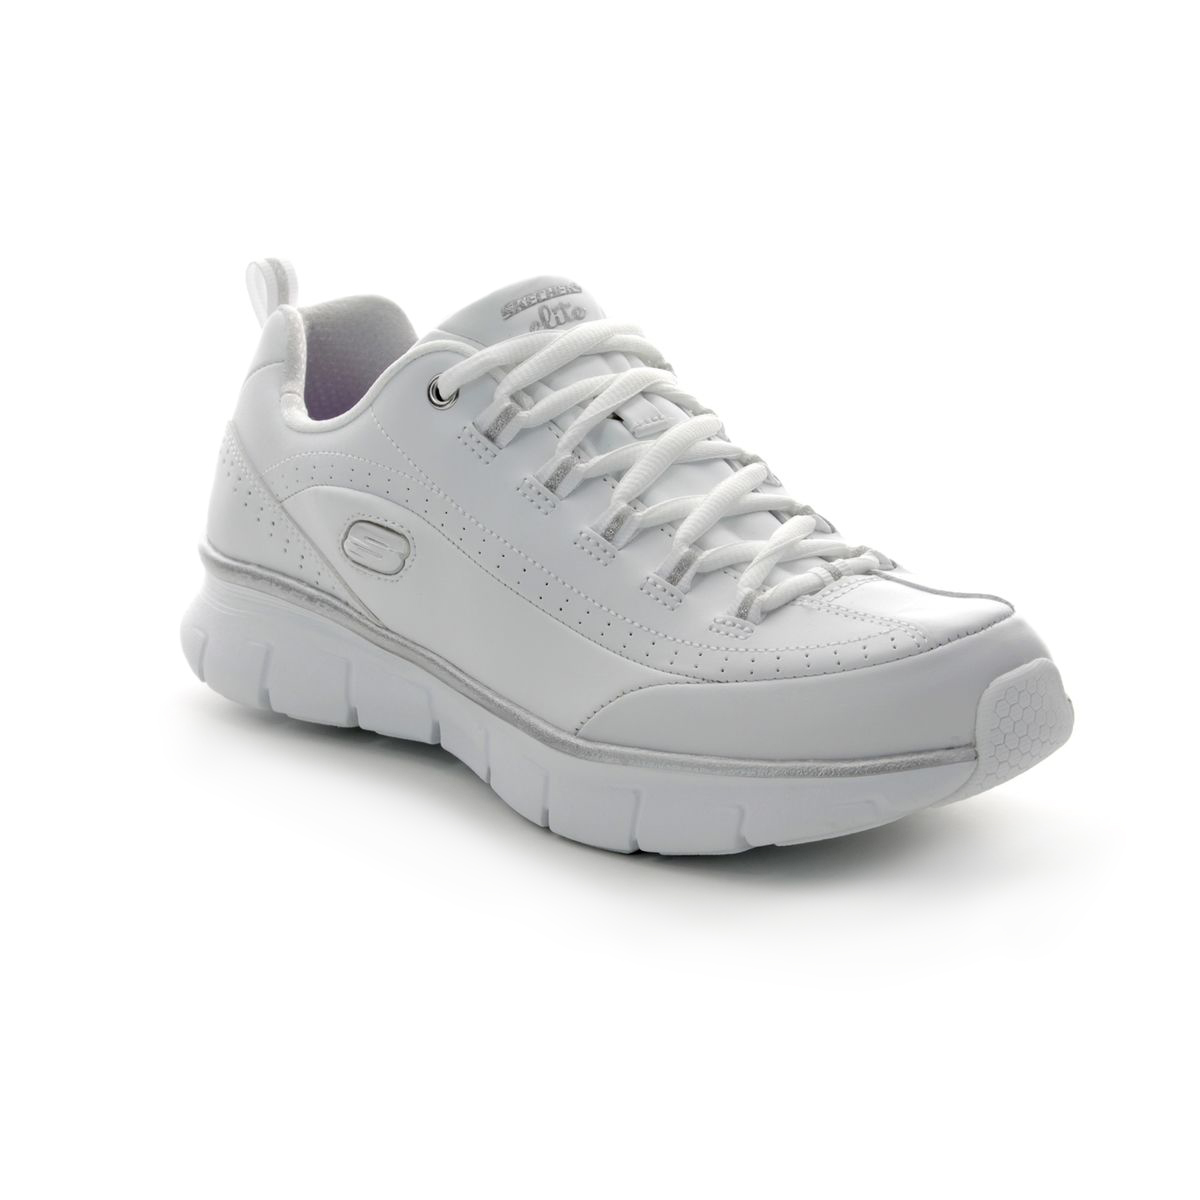 Skechers Synergy 3.0 13260 WSL White-silver trainers